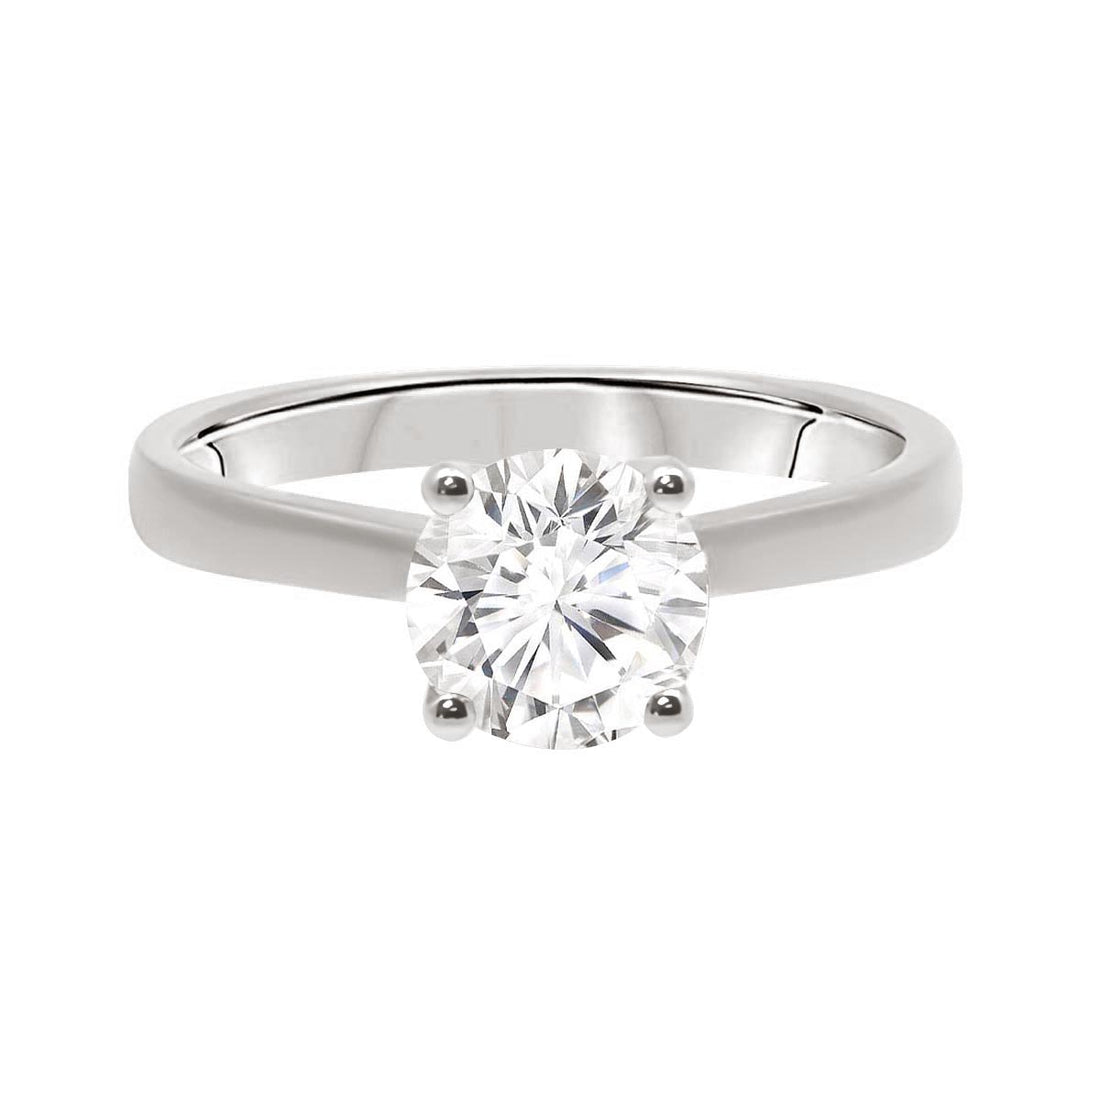 Tulip Setting Solitaire Engagement Ring In White Gold lying flat